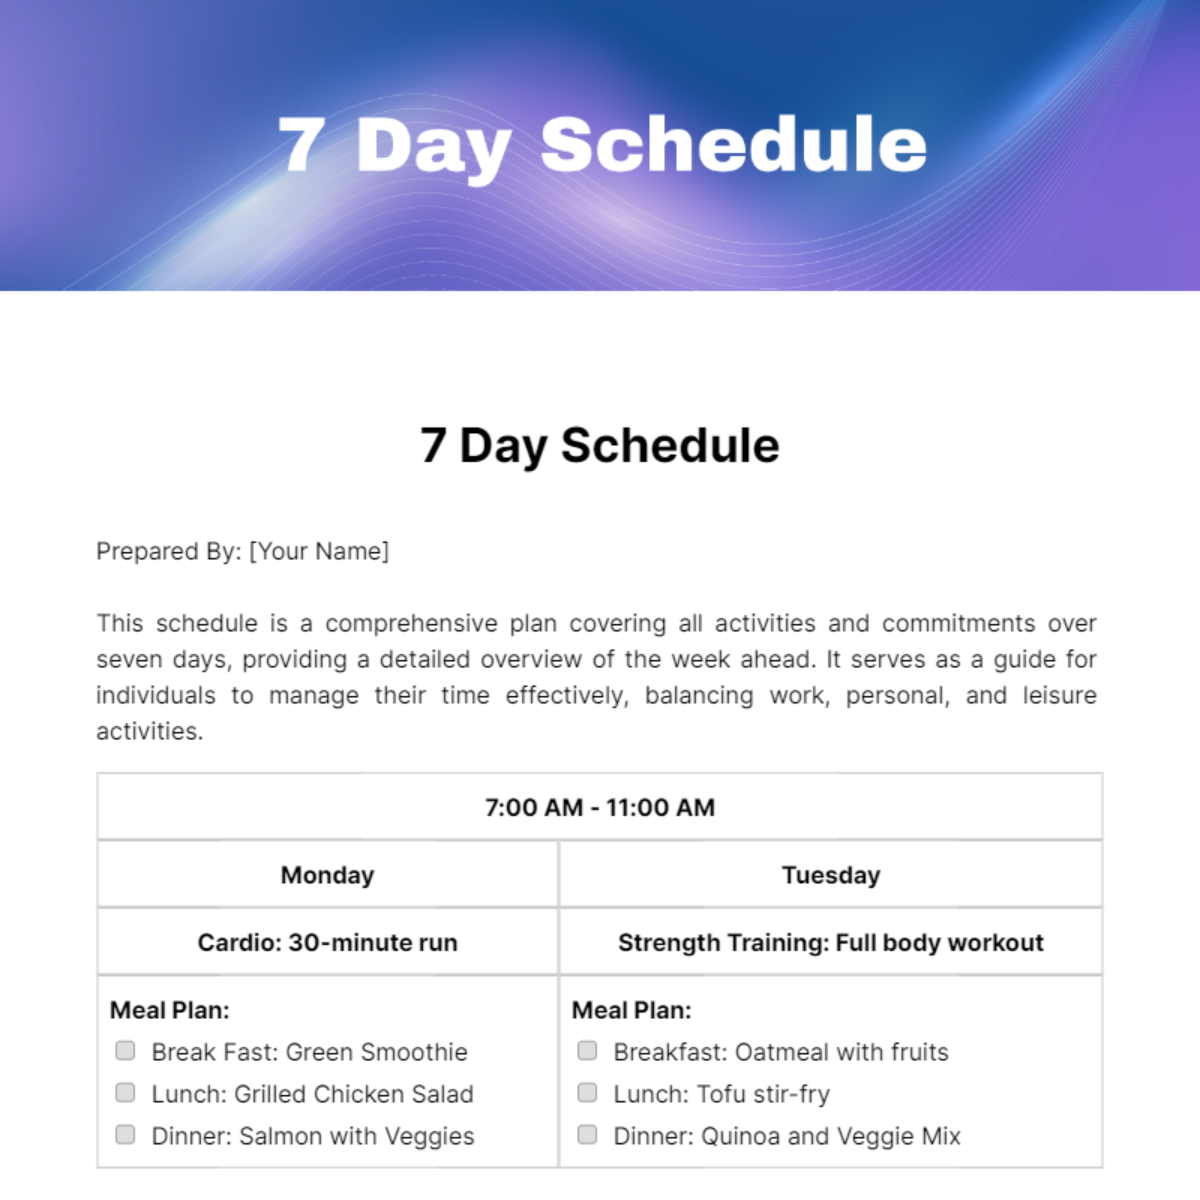 7 Day Schedule Template